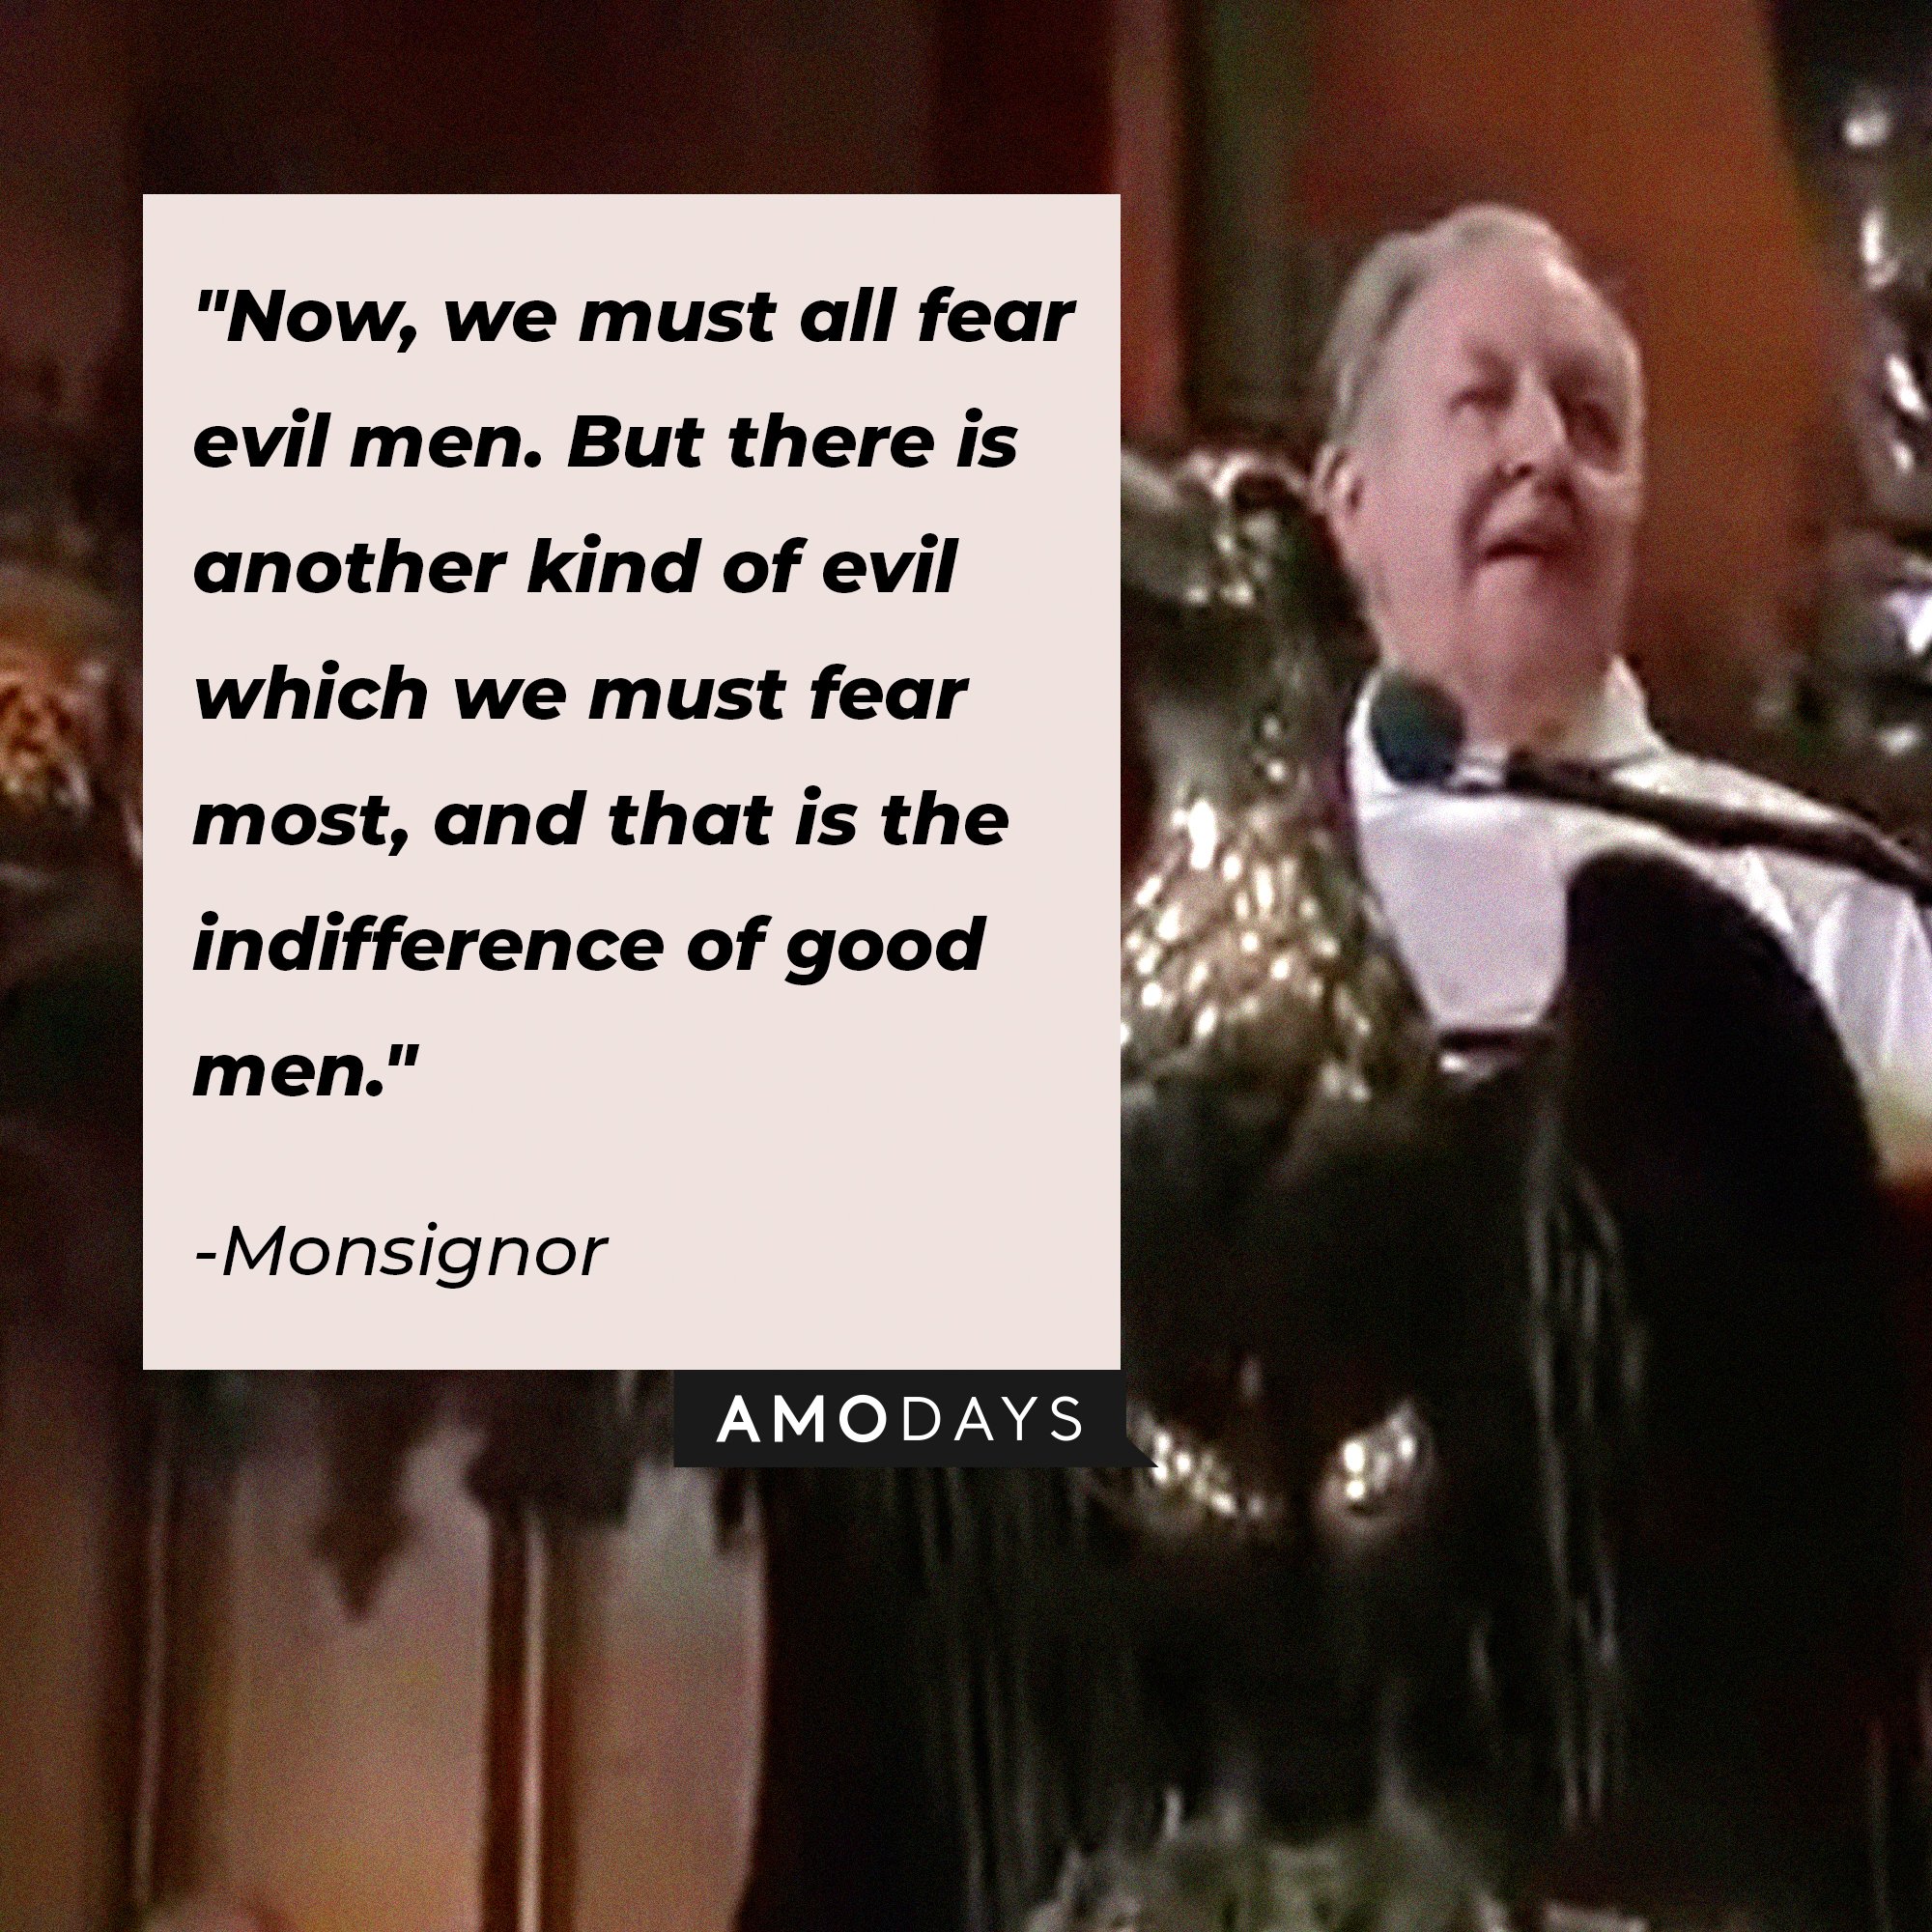  Monsignor’s quote: "Now, we must all fear evil men. But there is another kind of evil which we must fear most, and that is the indifference of good men."  | Image: AmoDays